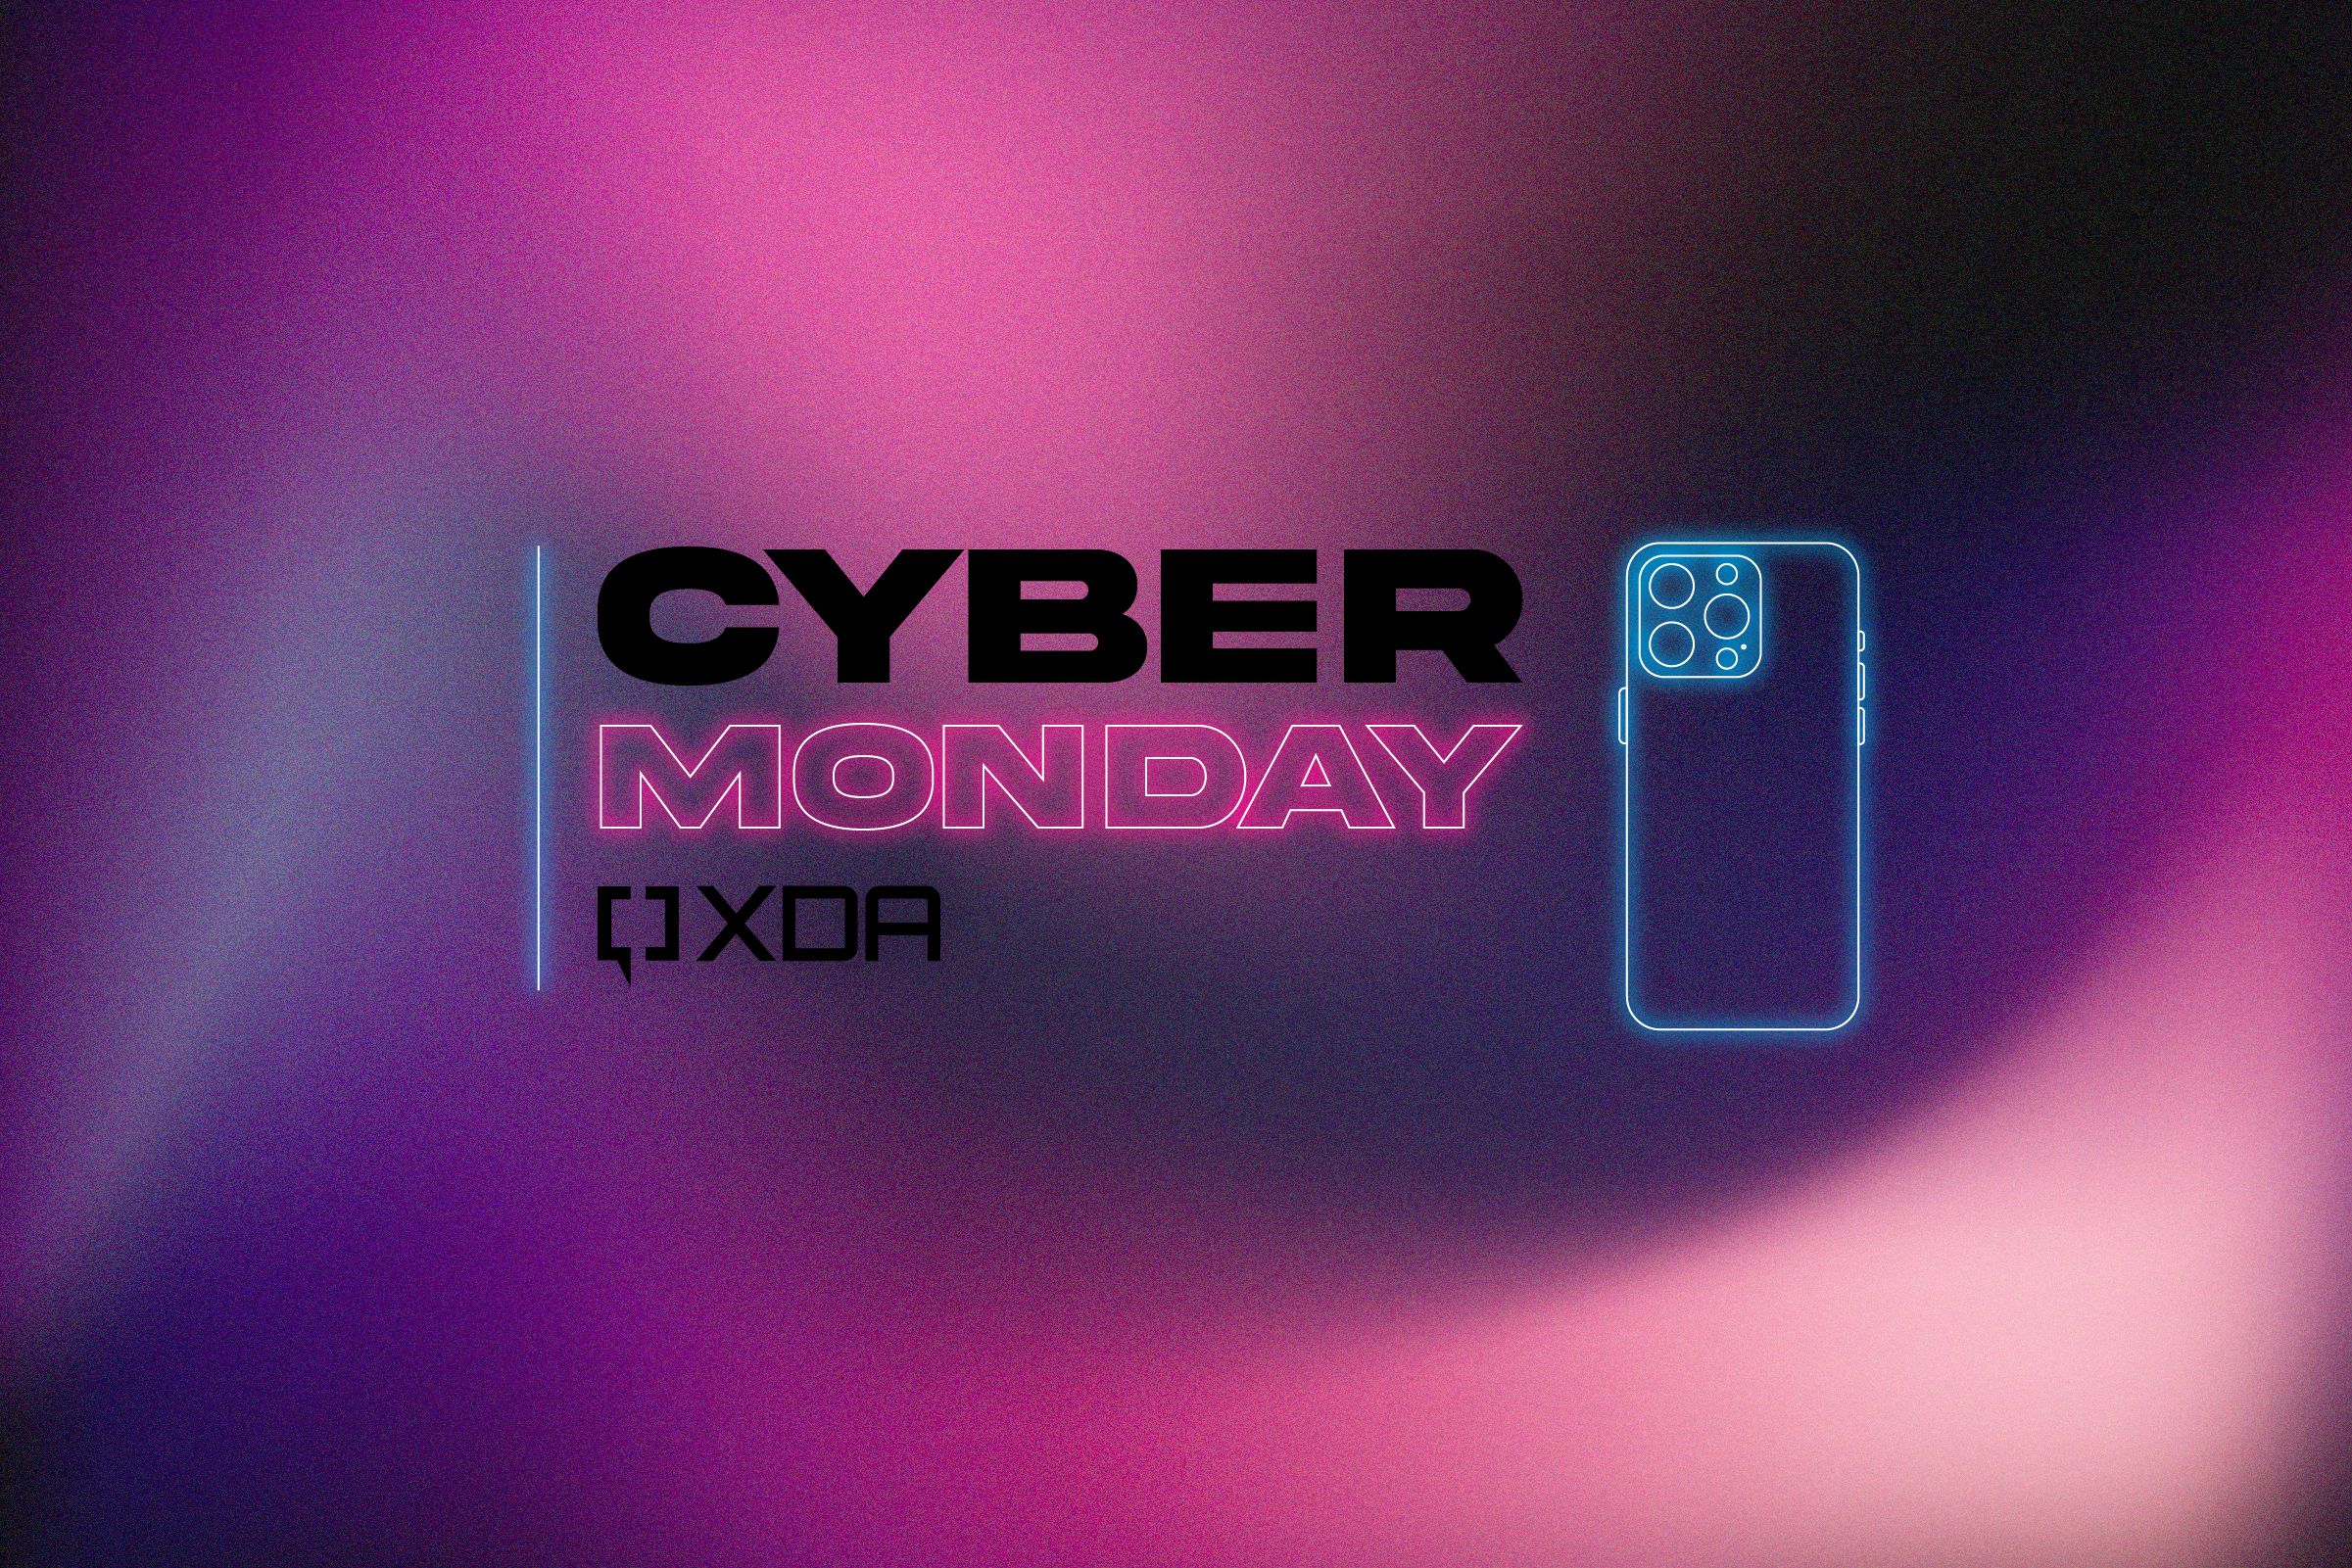 Cyber Monday Friday Apple deals